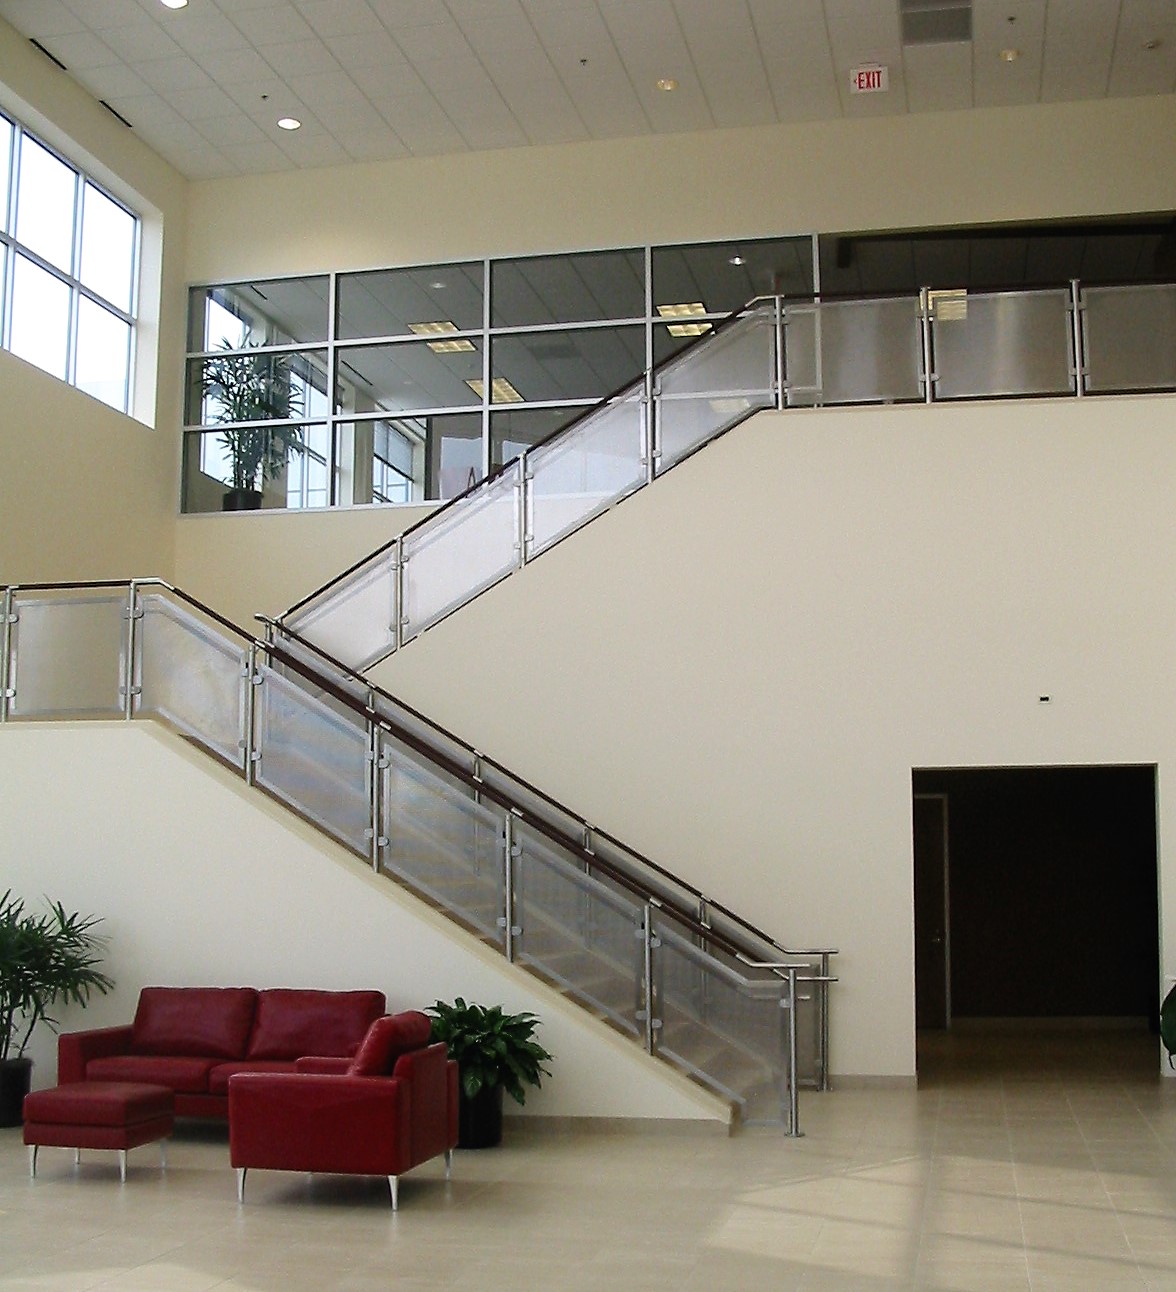 Circum leather and stainless steel handrail installation at American Leather, TX.